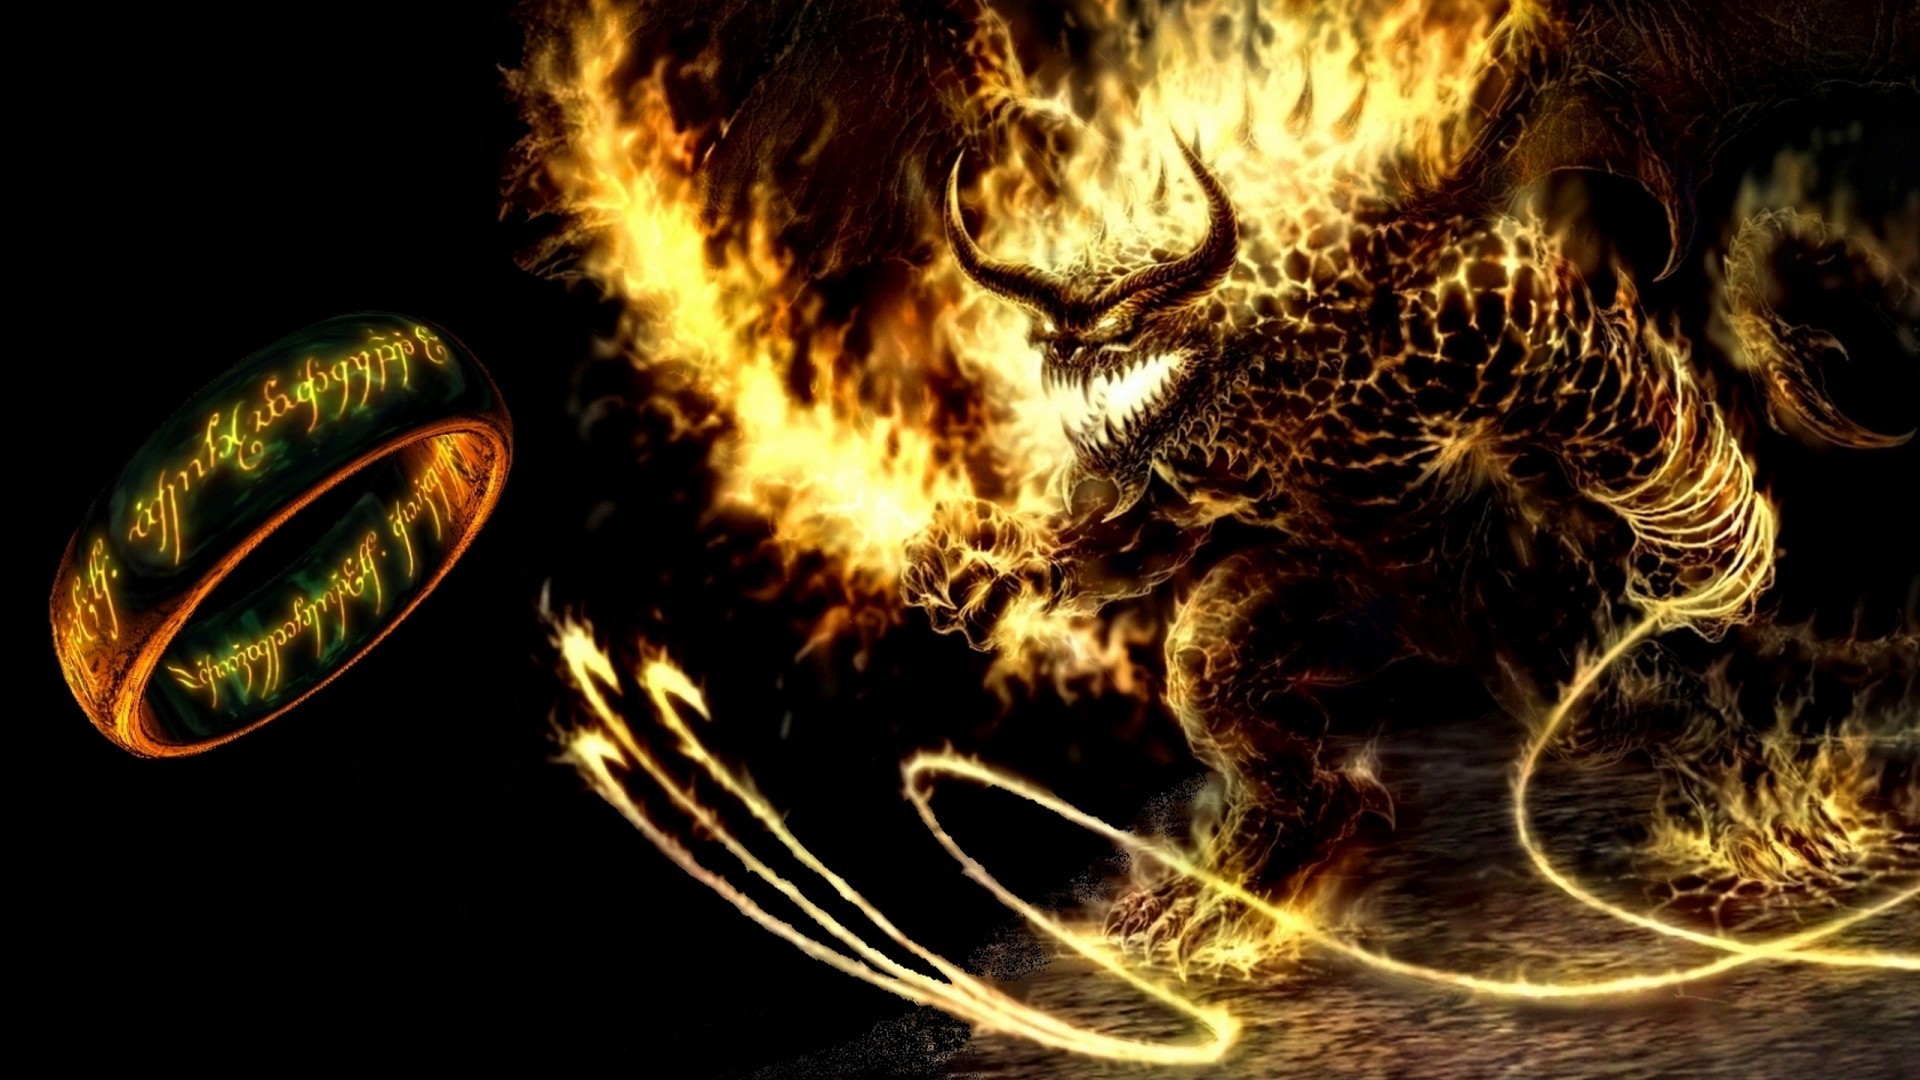 General 1920x1080 The Lord of the Rings Balrog rings Middle-Earth fantasy art black background fire demon creature